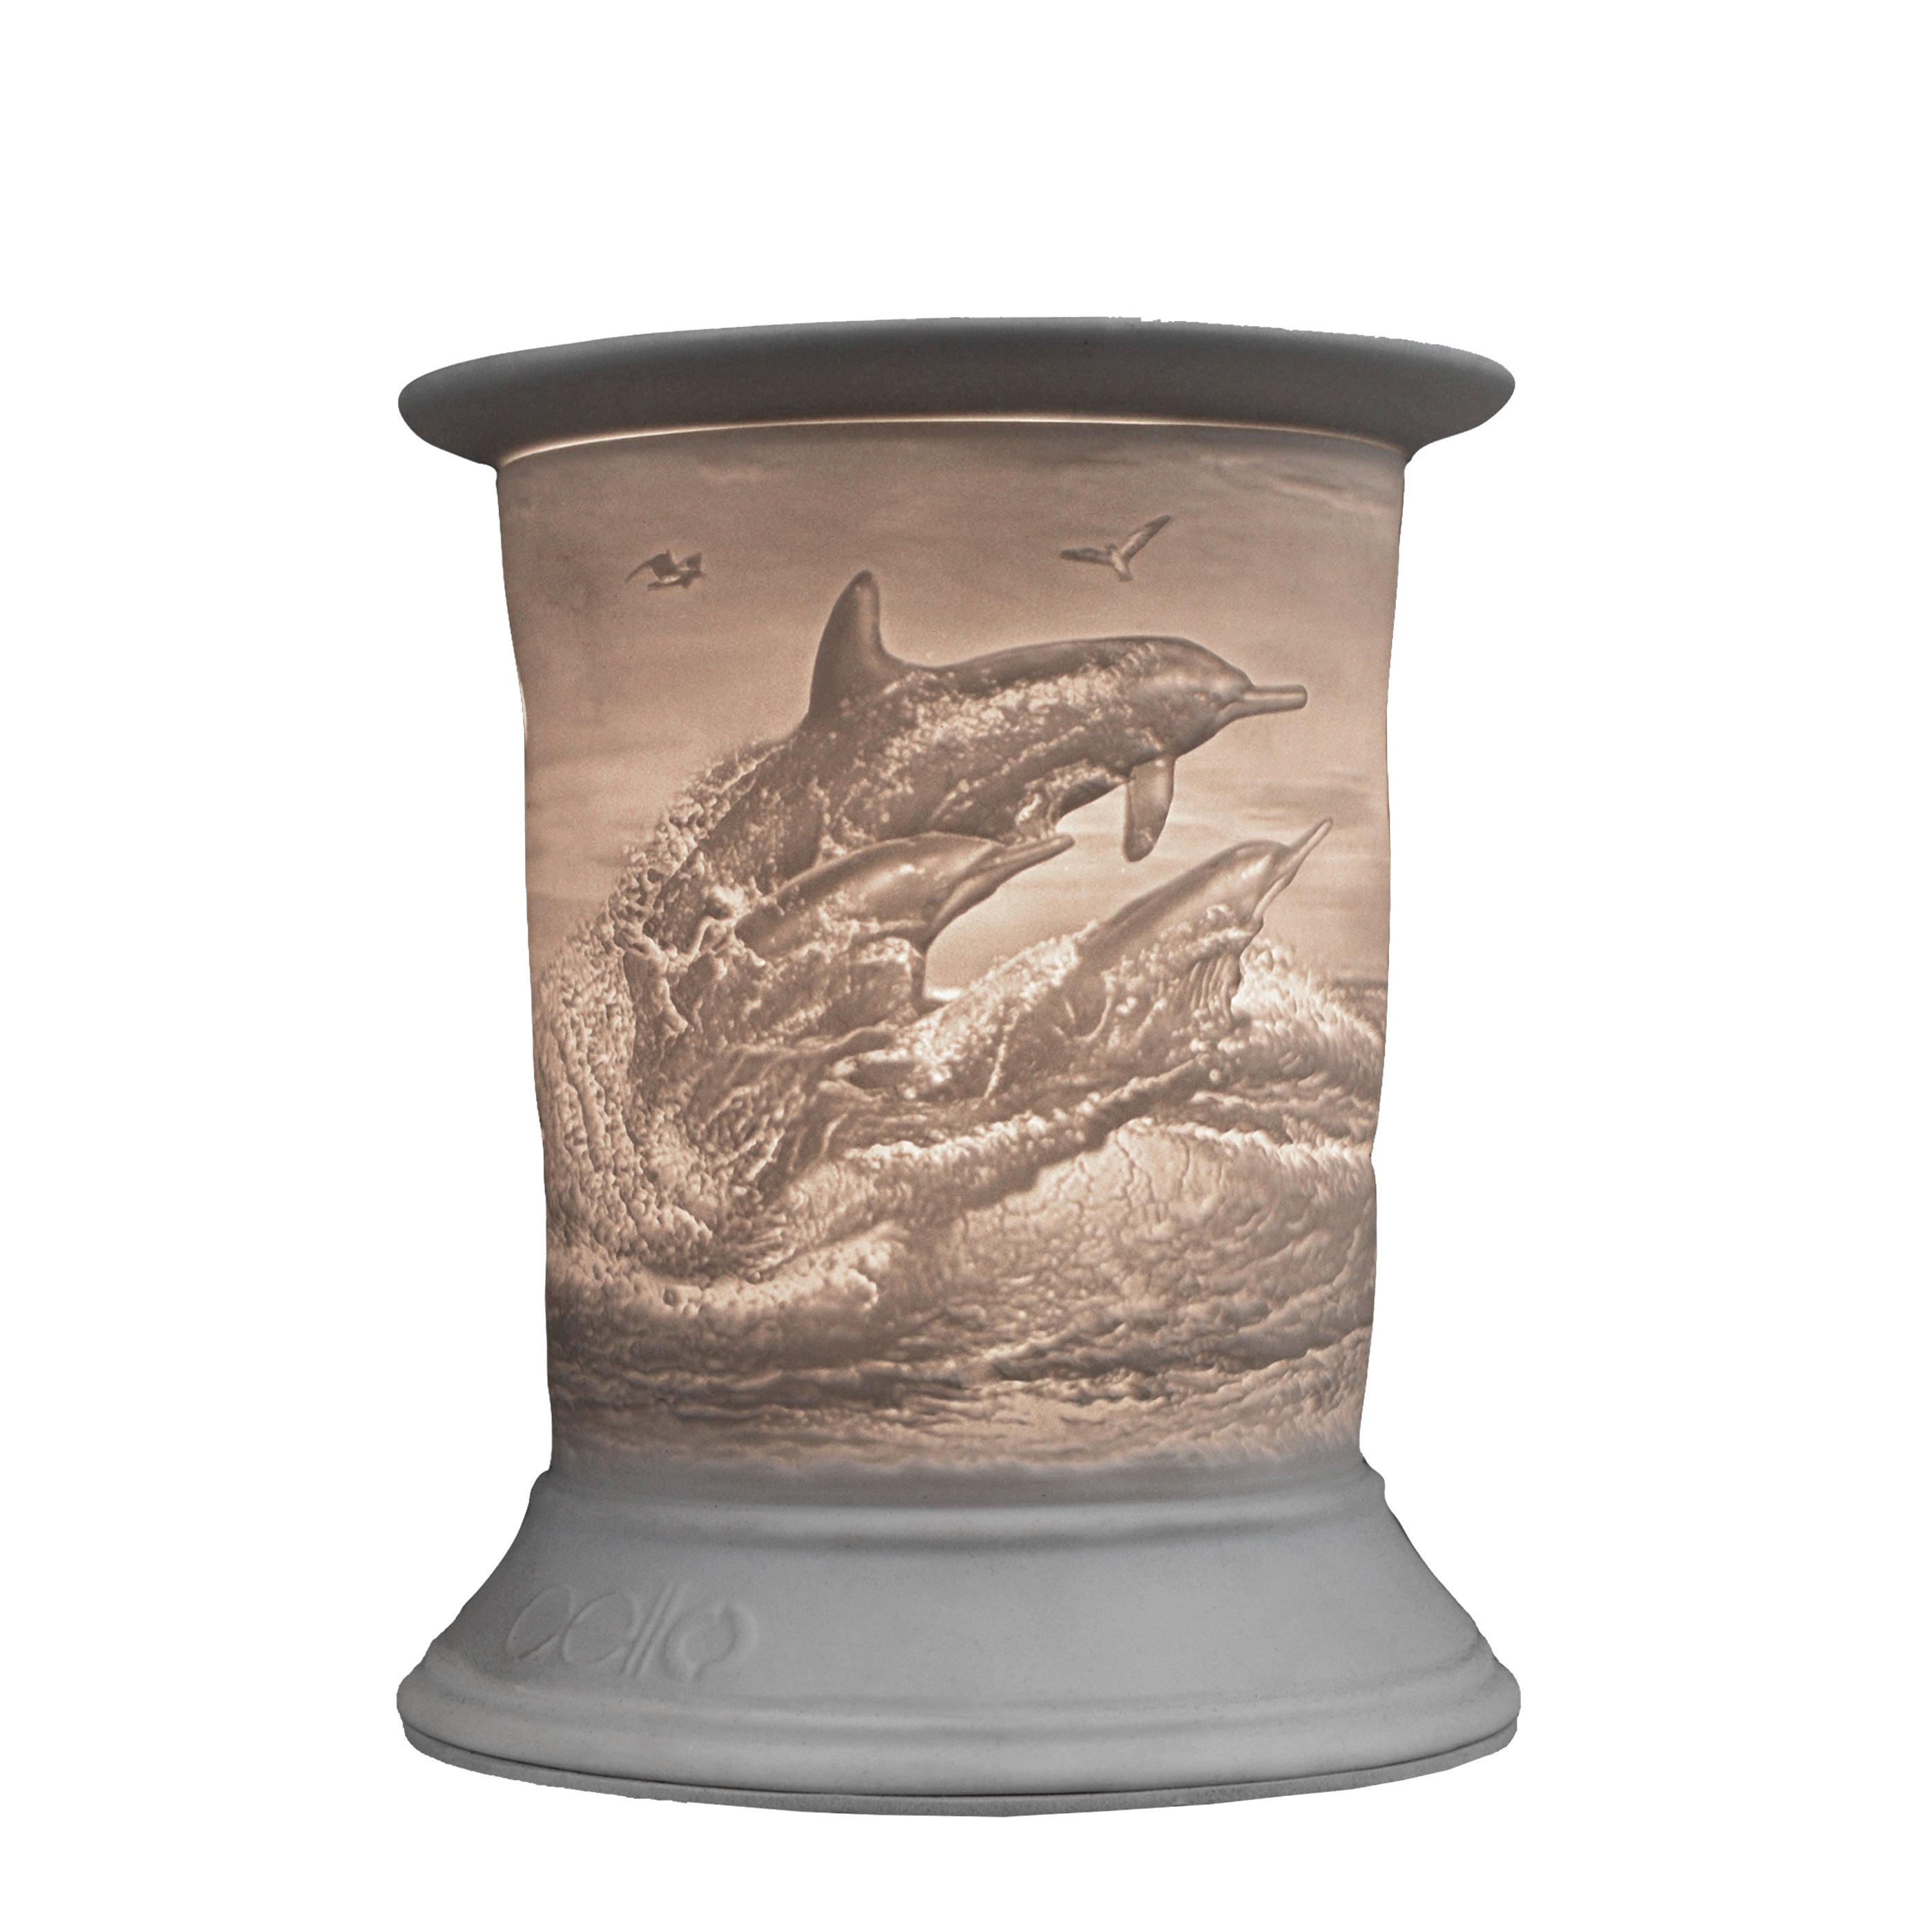 The porcelain material on this Wax Melt Burner allows bright light to shine through it, providing the opportunity to create this gorgeous Dolphin design. This is done by crafting images out of thicker and thinner sections of the porcelain, allowing for detailed shadowing and a 3D effect. The porcelains elegant look will fit perfectly in any room is available in a range of designs and two different shapes.